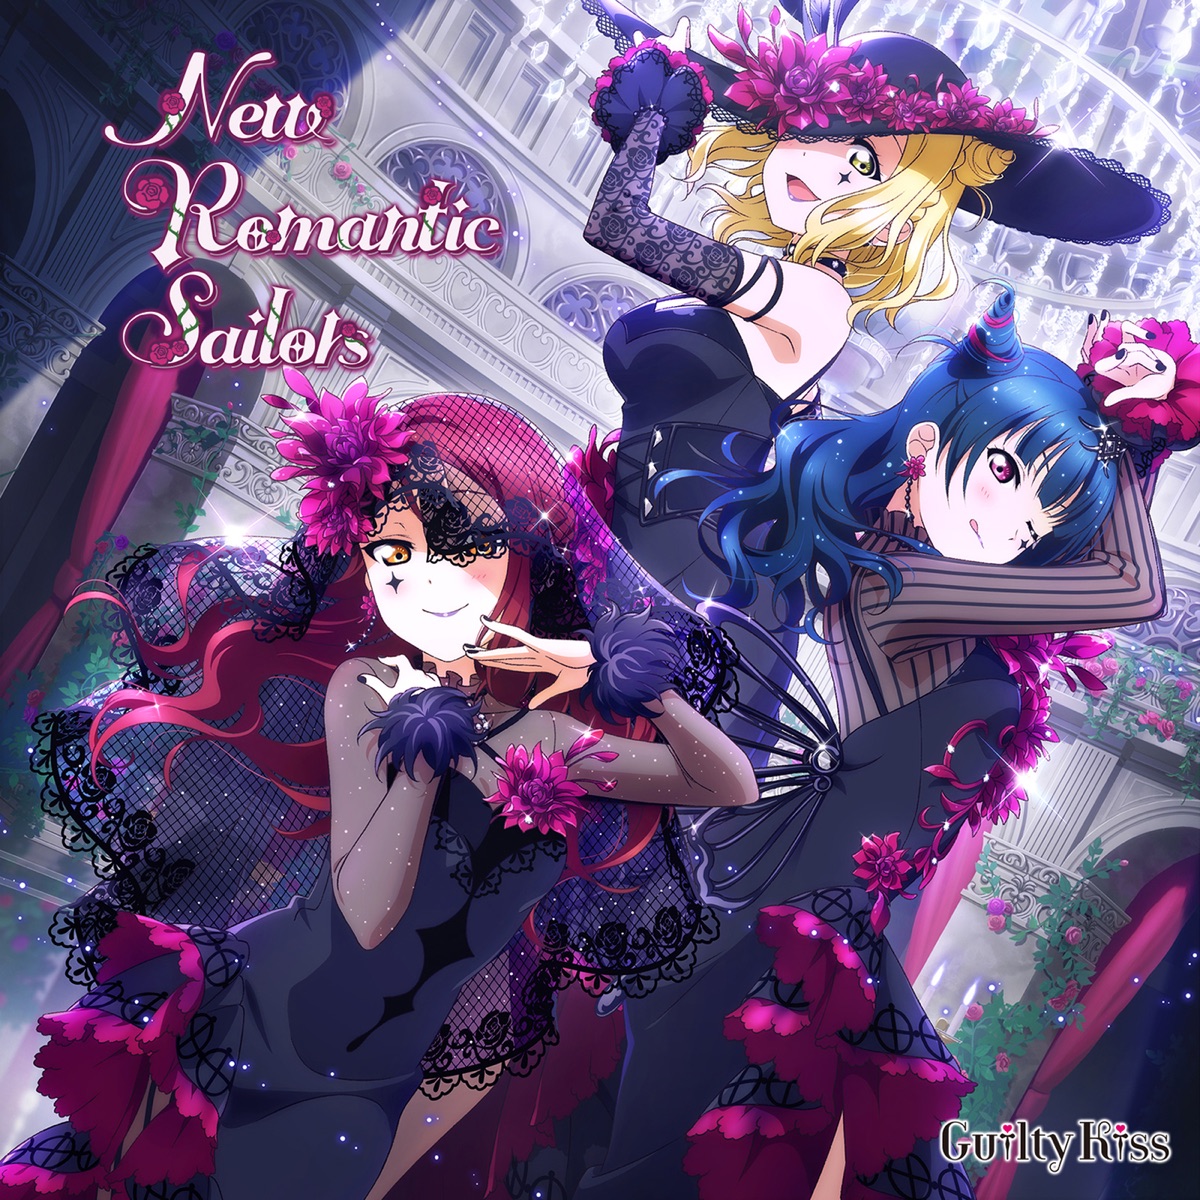 Cover art for『Guilty Kiss - Phantom Rocket Adventure』from the release『New Romantic Sailors』